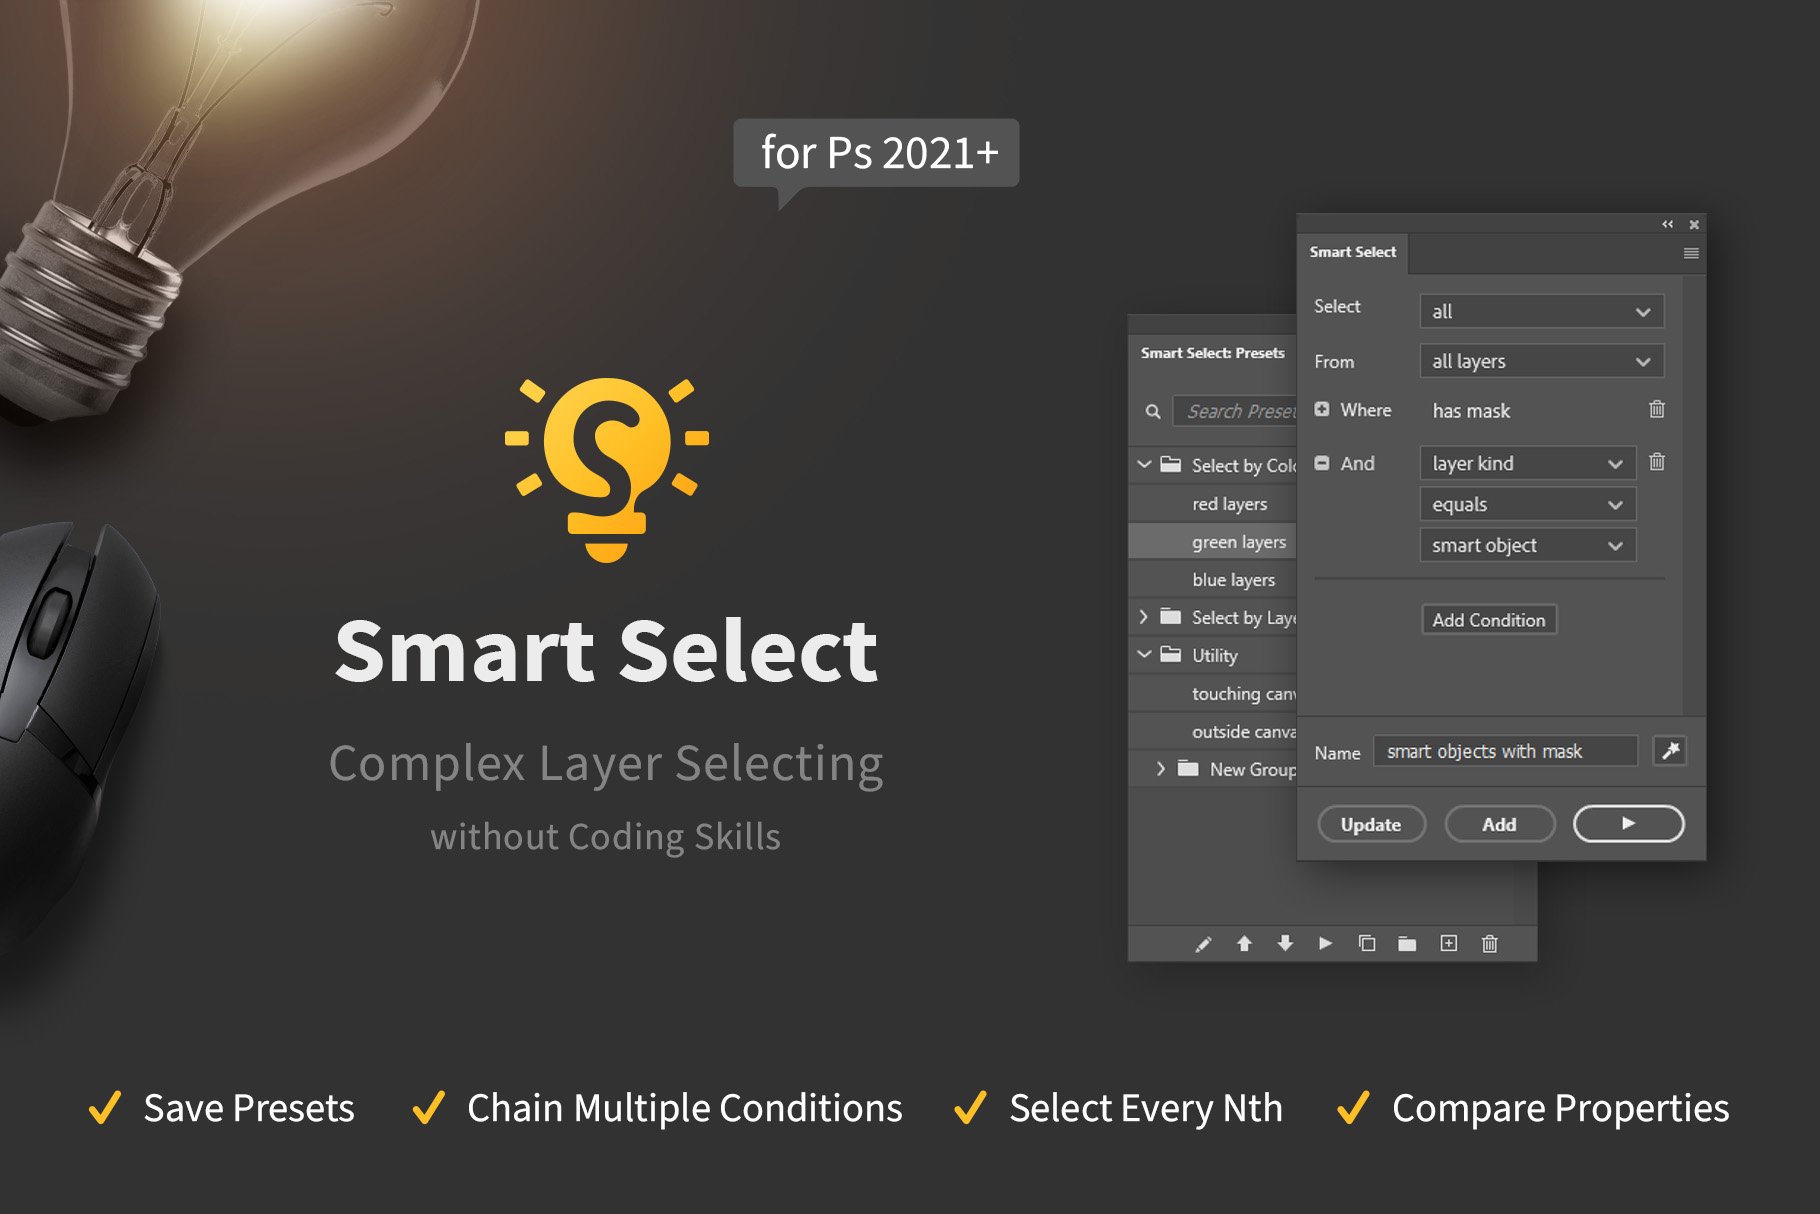 Smart Select - Complex Layer Queriescover image.